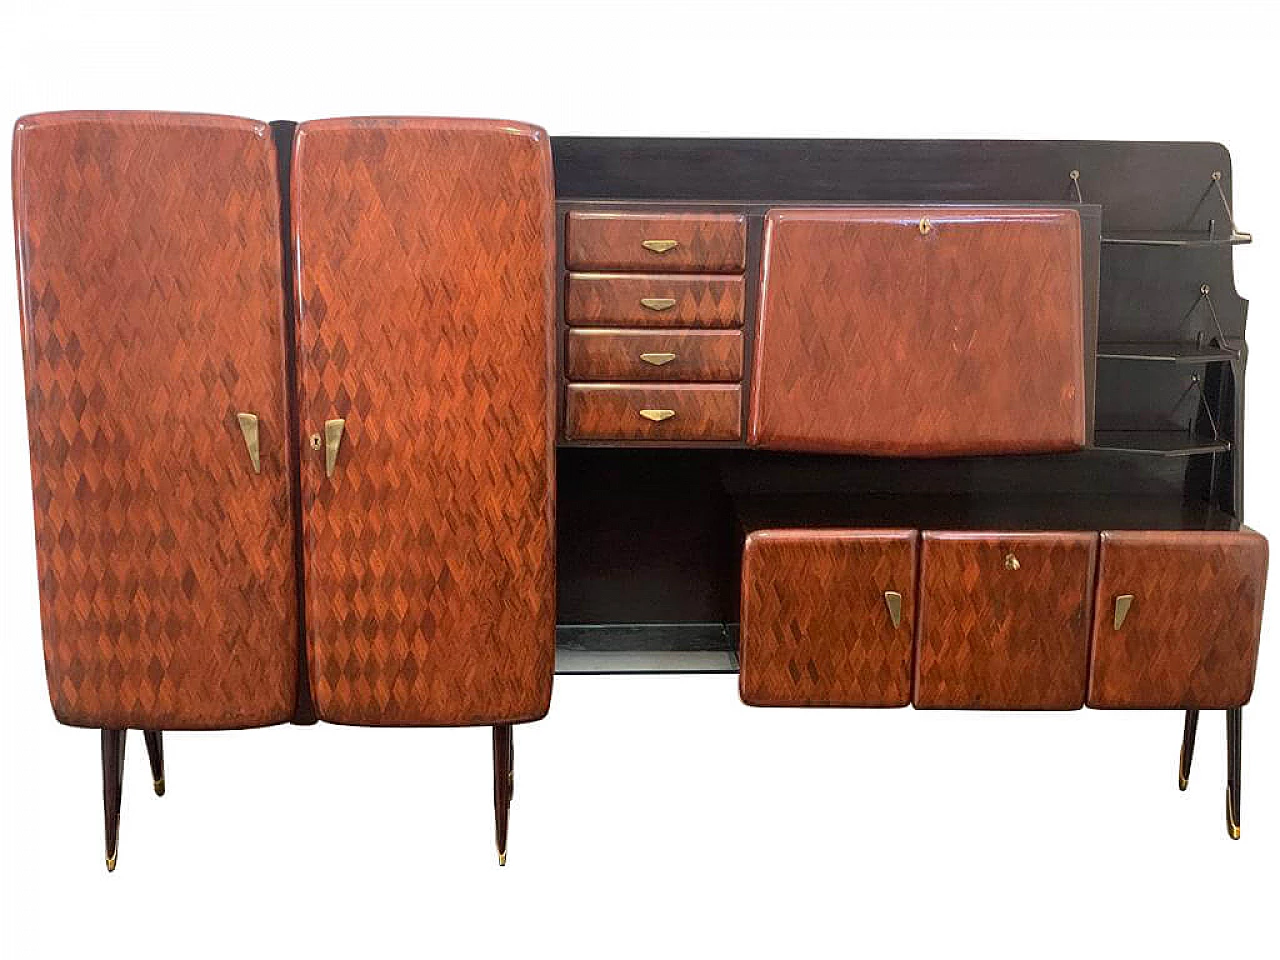 Tall rosewood sideboard by Fratelli Pozzi Lissone, 1950s 1202492